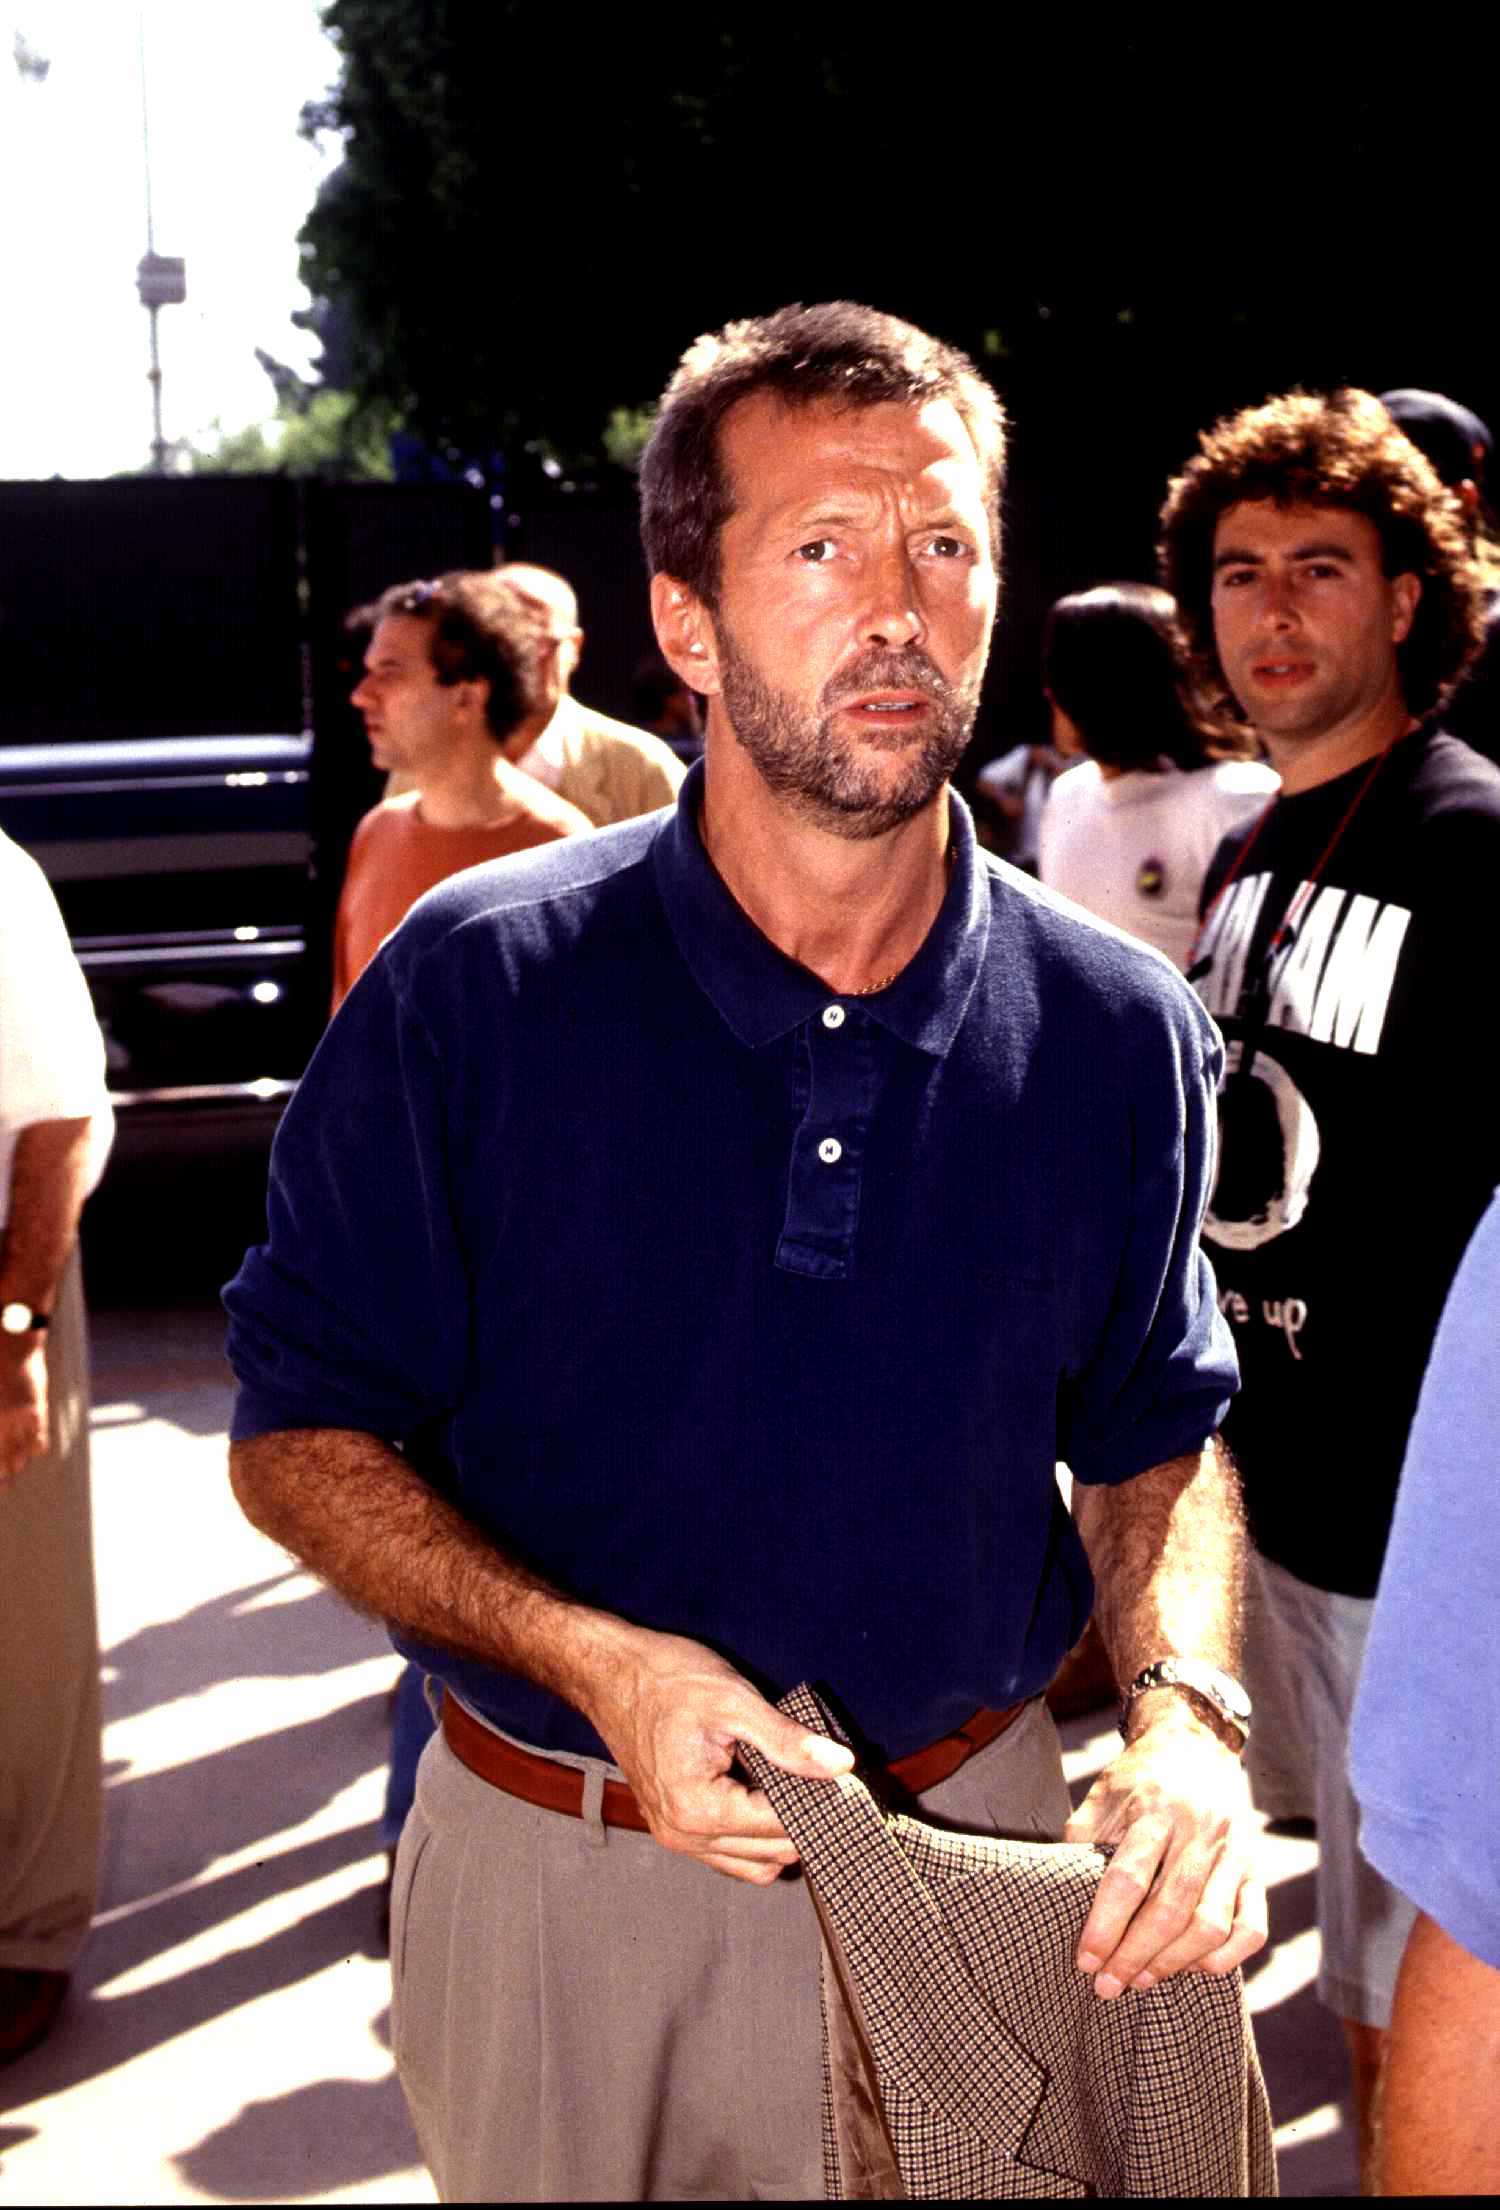 Eric Clapton at the MTV Awards in 1992, Universal City. | Source: Getty Images